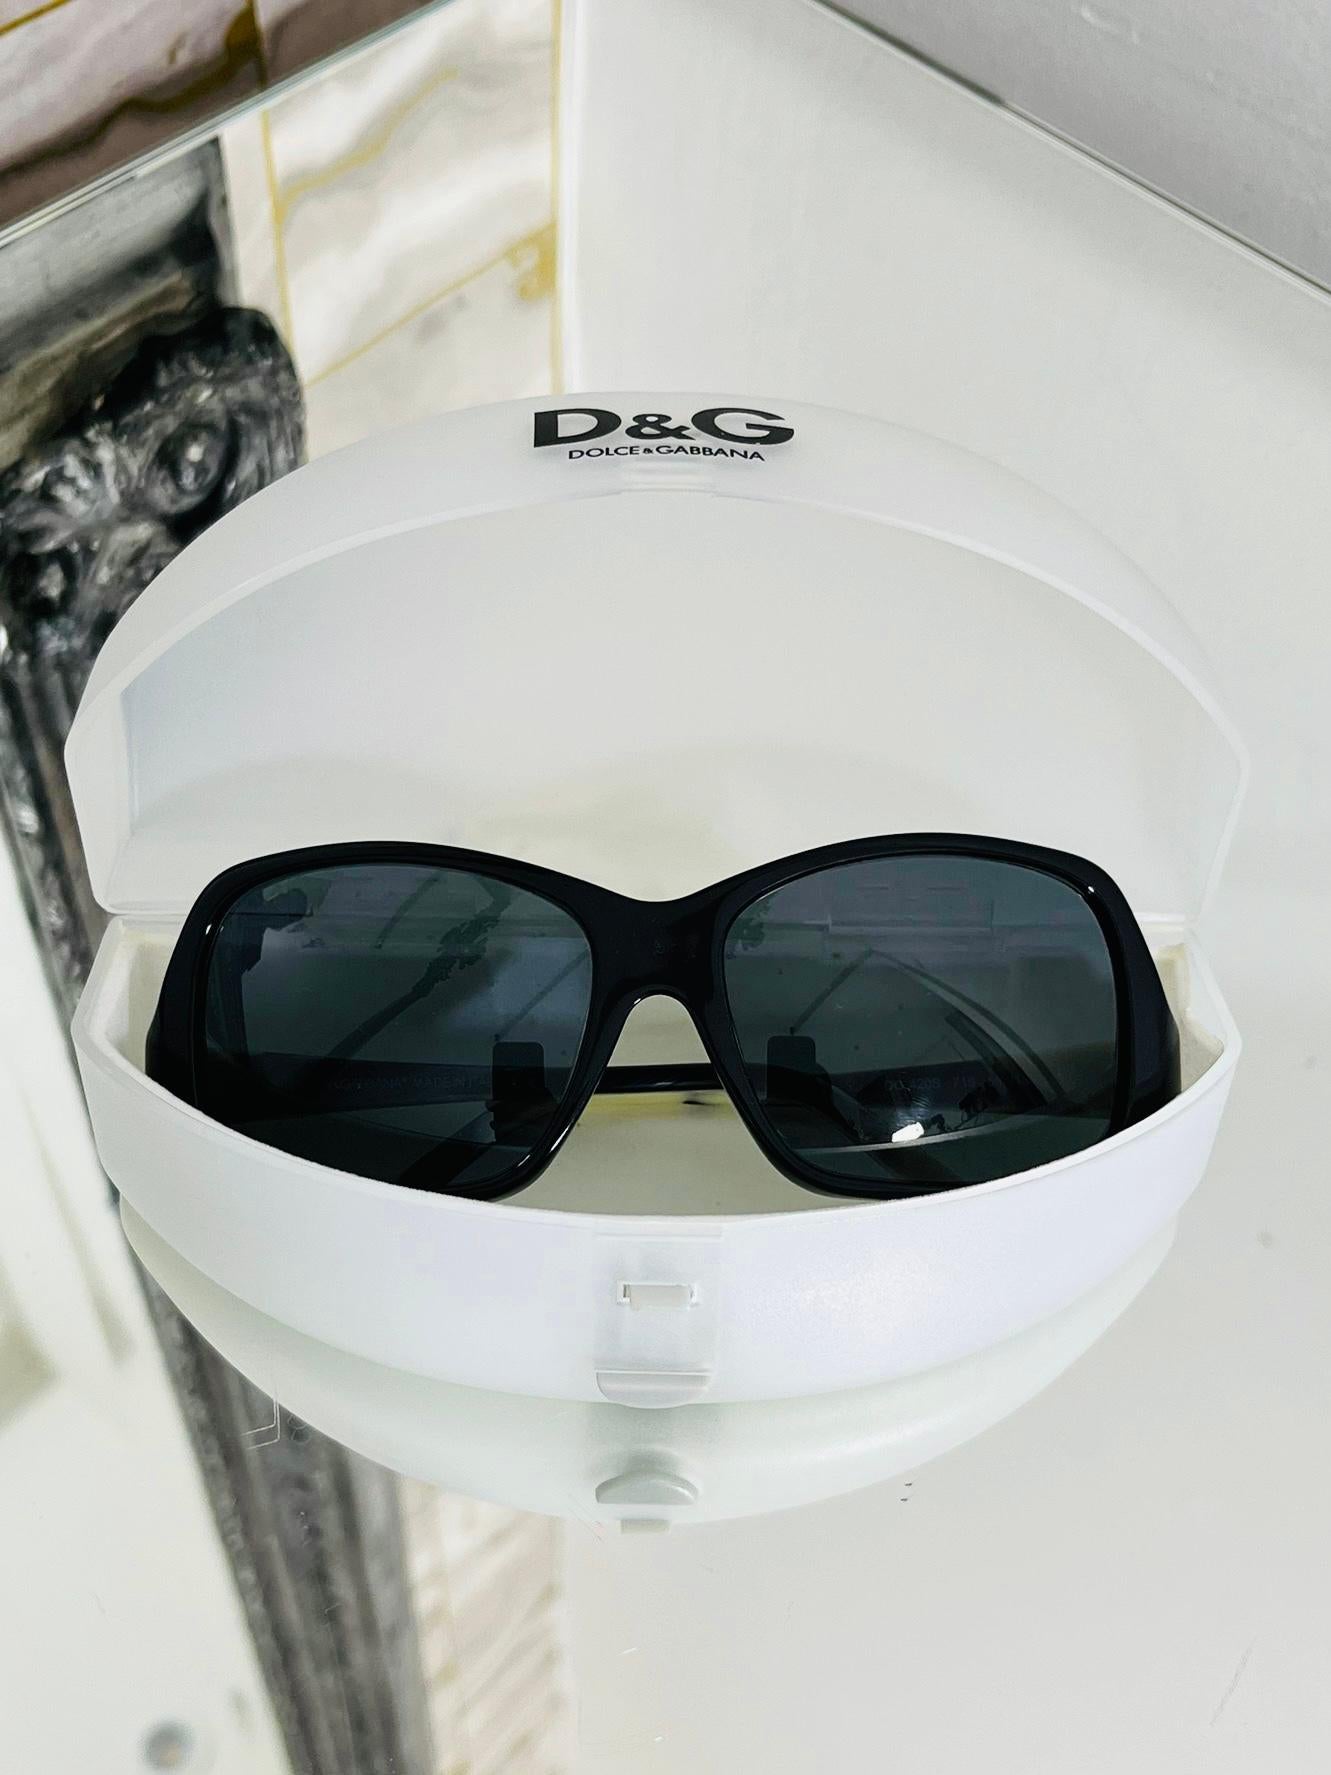 Dolce & Gabbana Sunglasses

Acetate frames, in black at the front and ivory and black to the sides

with 'Dolce & Gabbana' logo.

Size - One Size

Condition - Very Good

Composition - Plastic

Comes With - Case